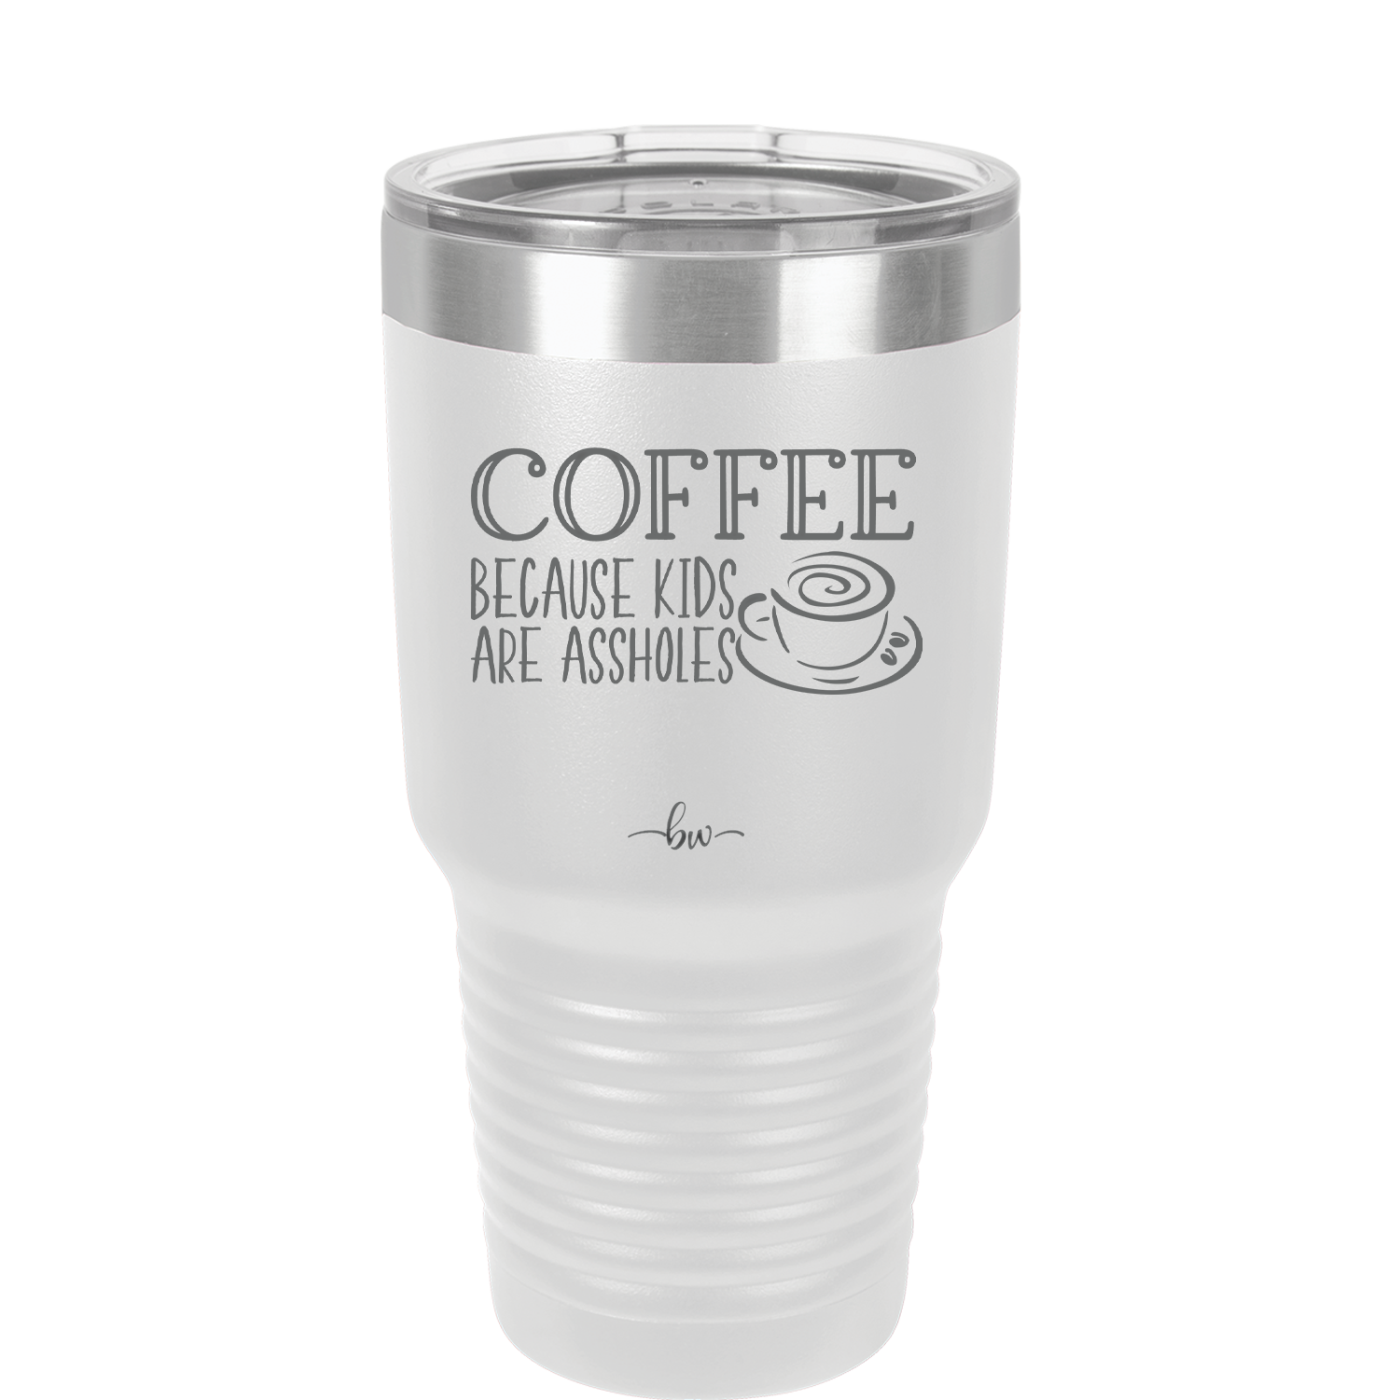 Coffee Because Kids Are Assholes with Cup and Saucer - Laser Engraved Stainless Steel Drinkware - 2199 -